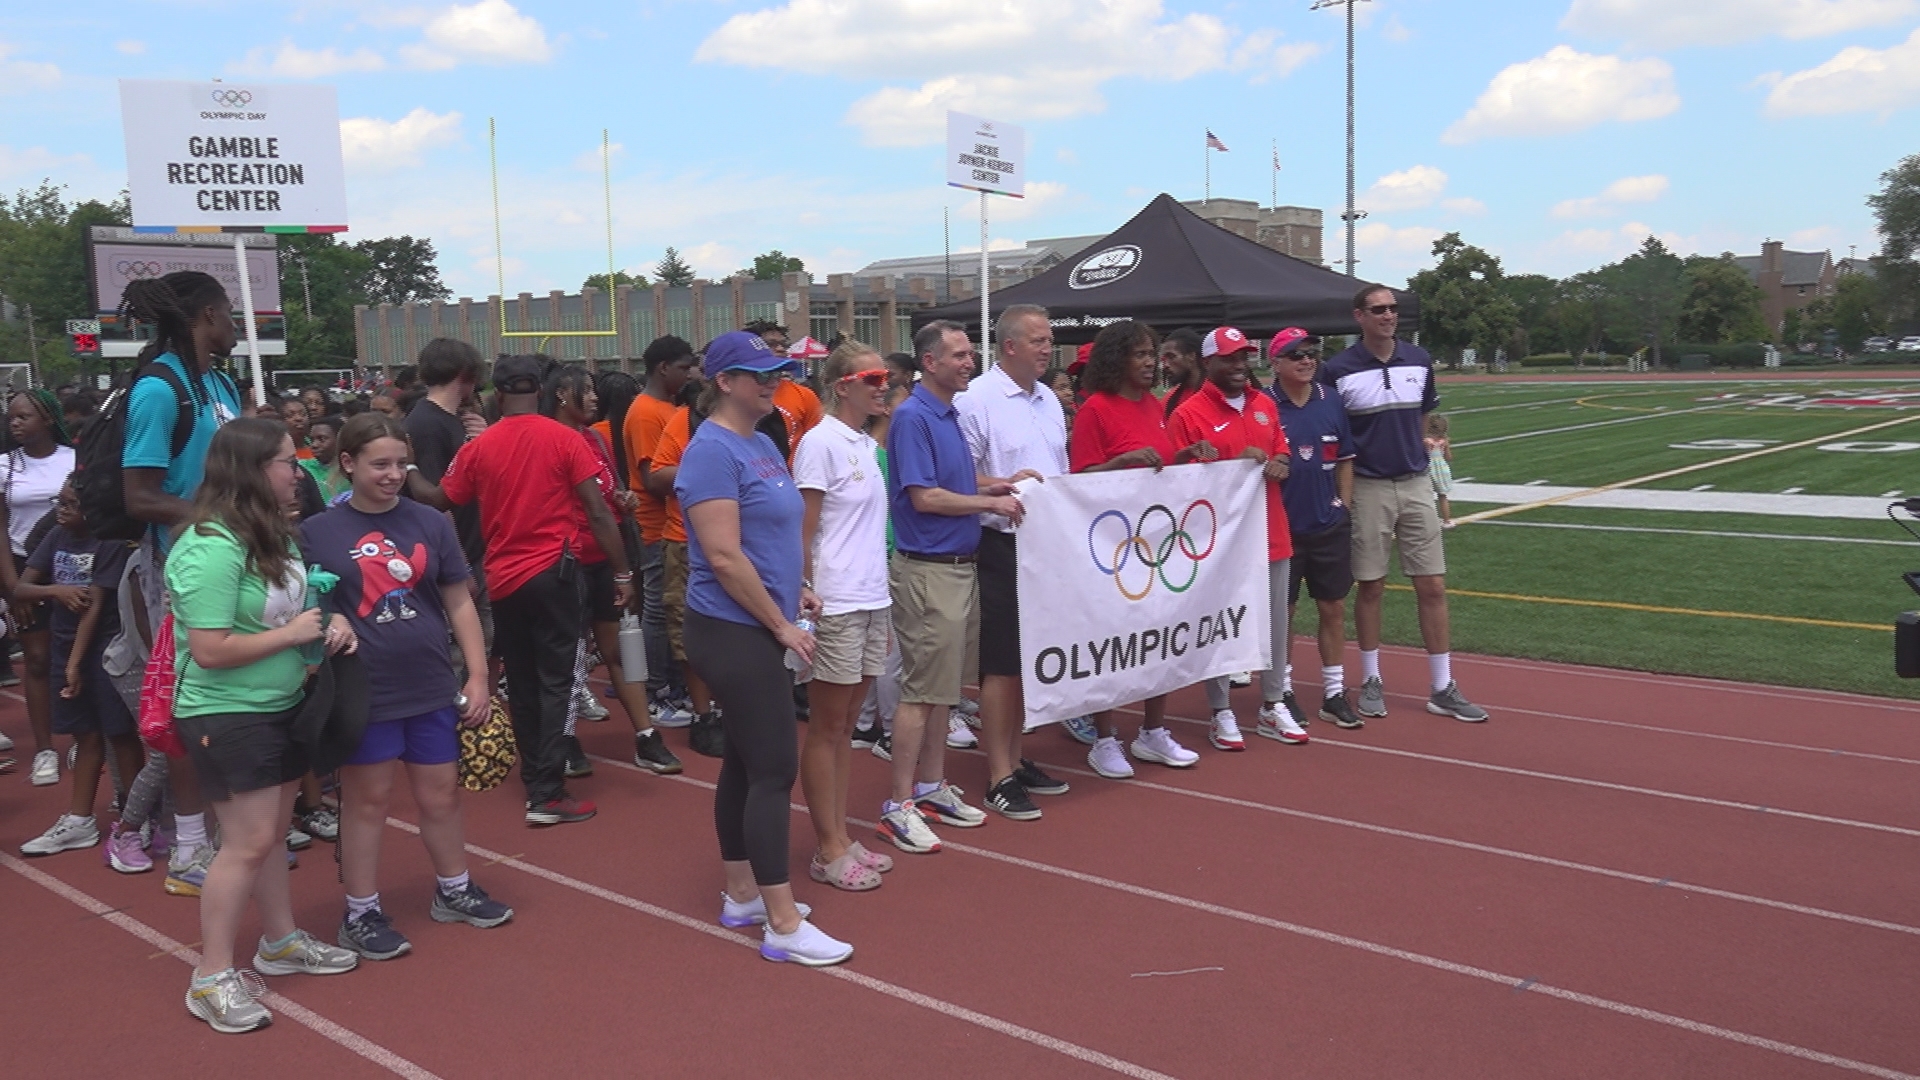 Olympic Day is an annual tradition at Washington University as it celebrates the history of the Olympics in St. Louis with the 1904 Summer Games.